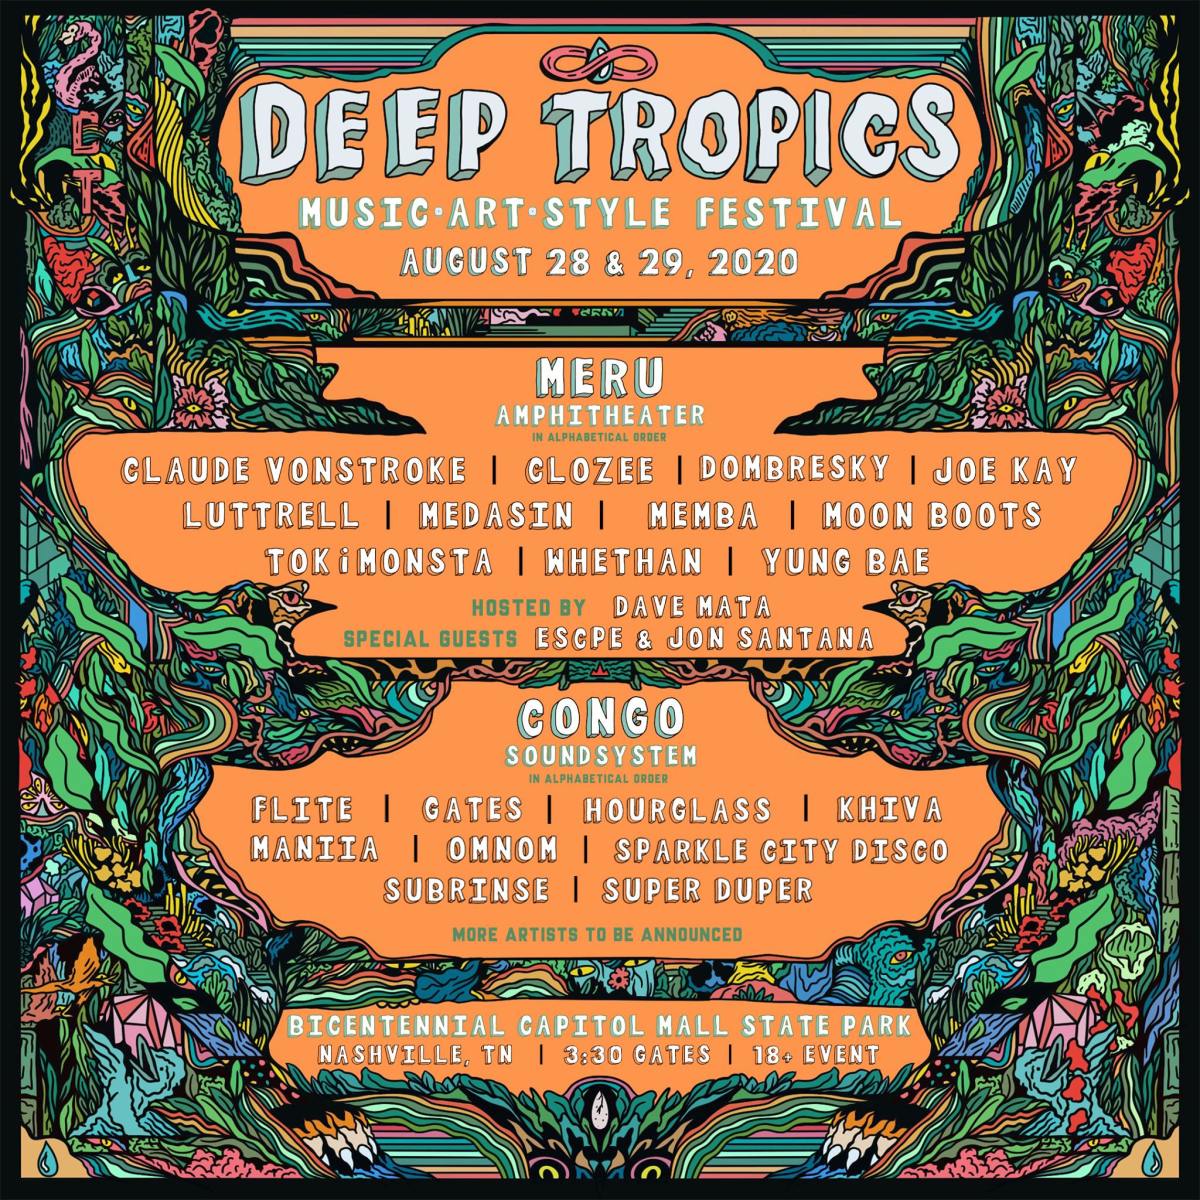 Deep Tropics Announces Lineup for 2020 Outing The Latest